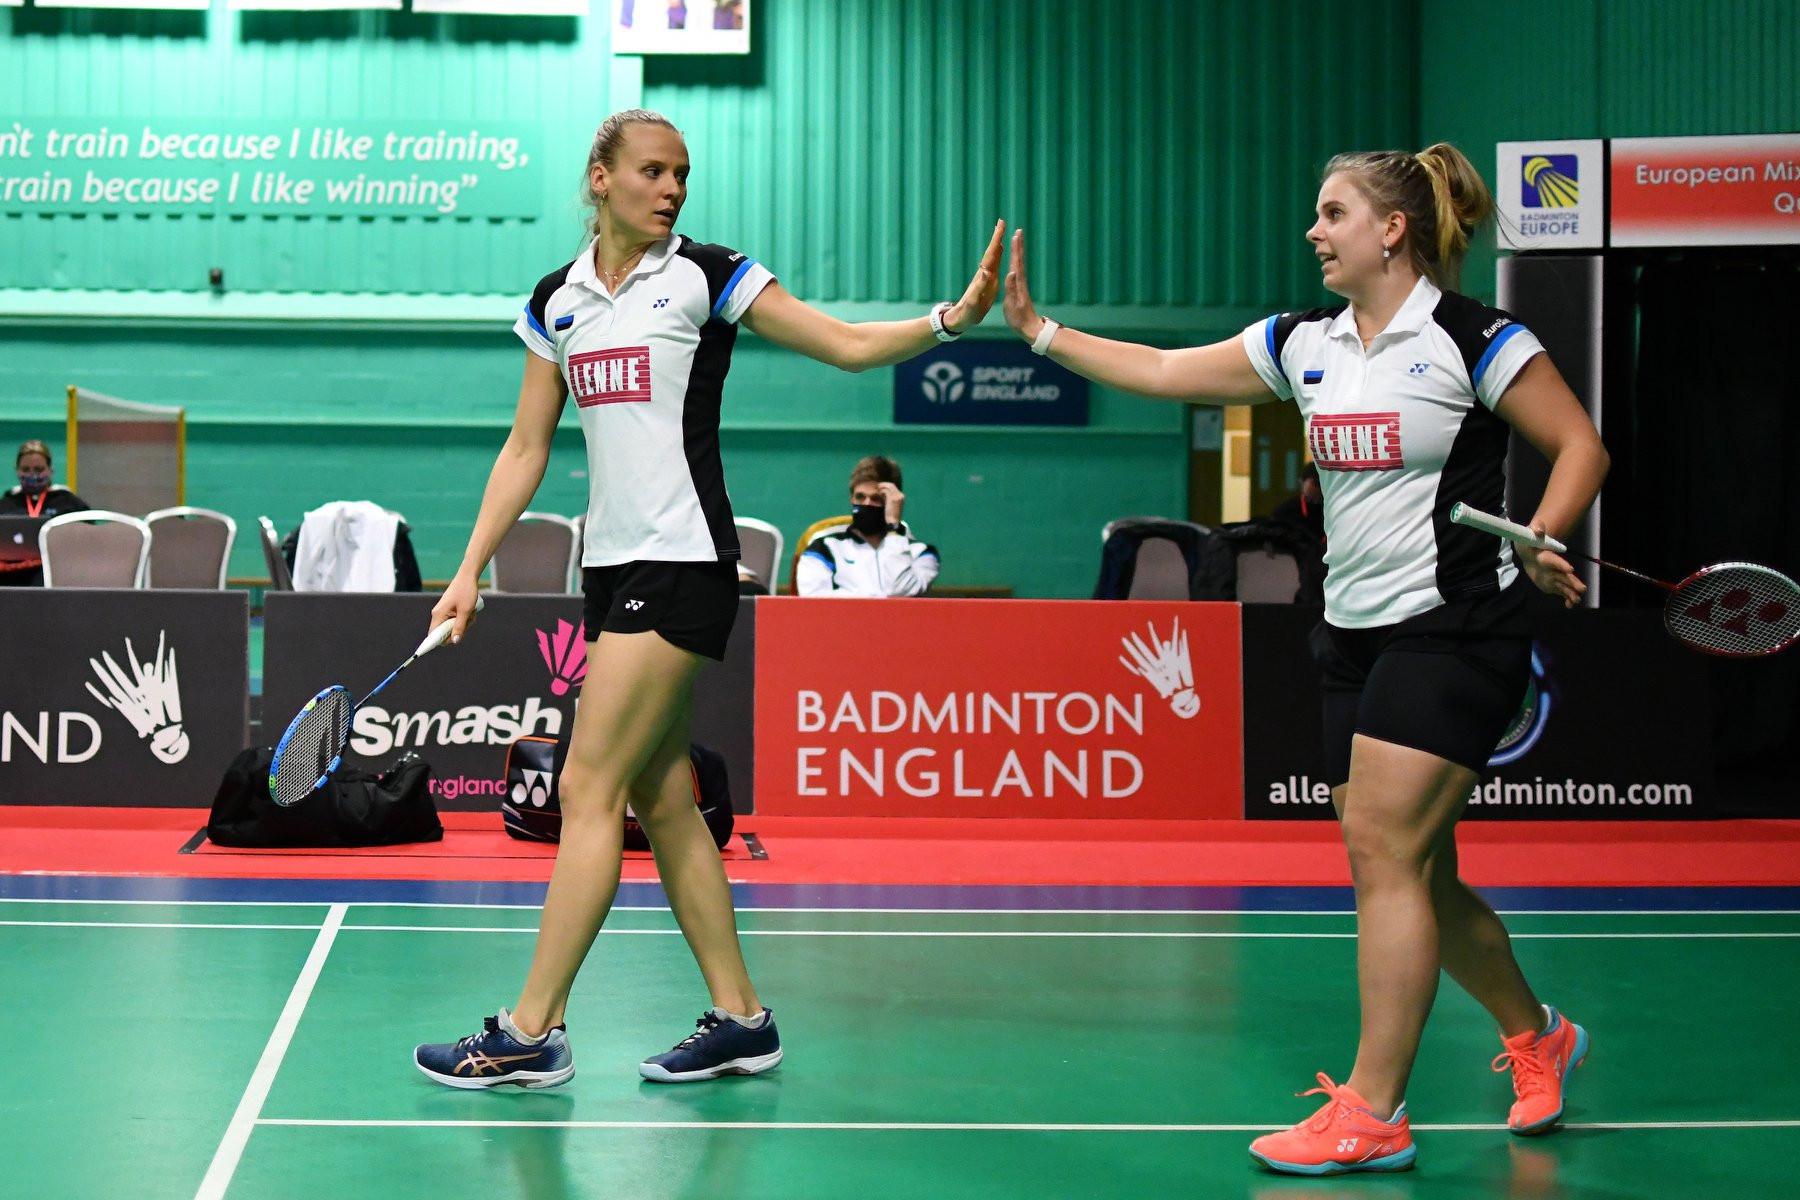 Estonia came from behind to defeat Sweden ©Facebook/Badminton Europe/Alan Spink